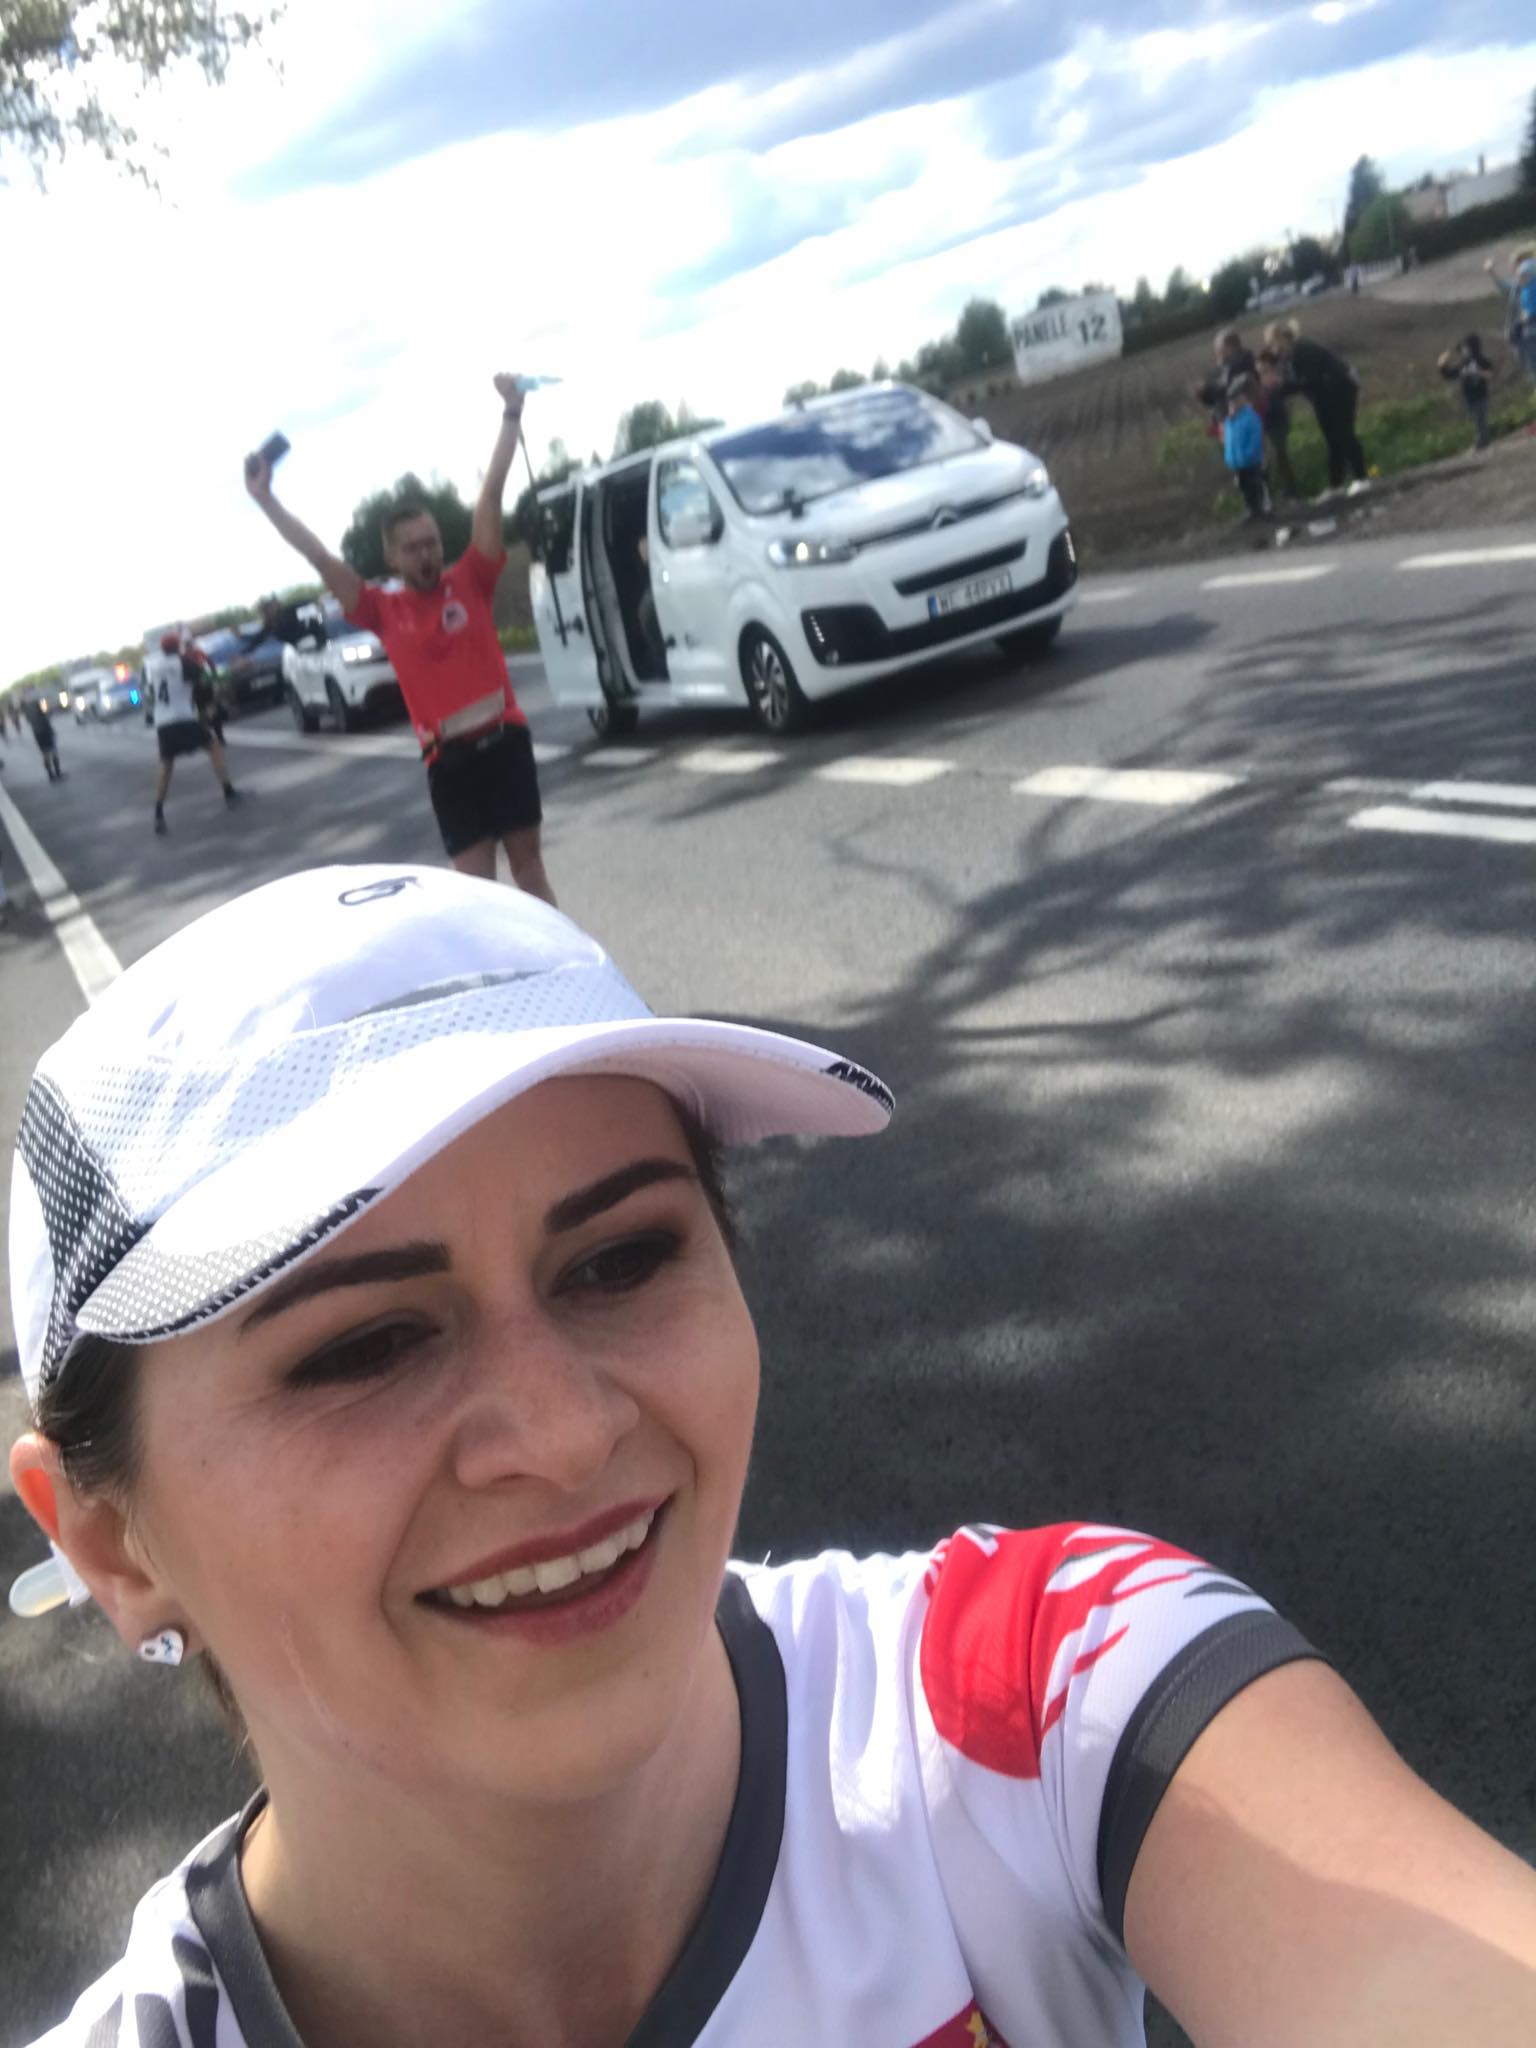 WINGS FOR LIFE WORLD RUN - S12